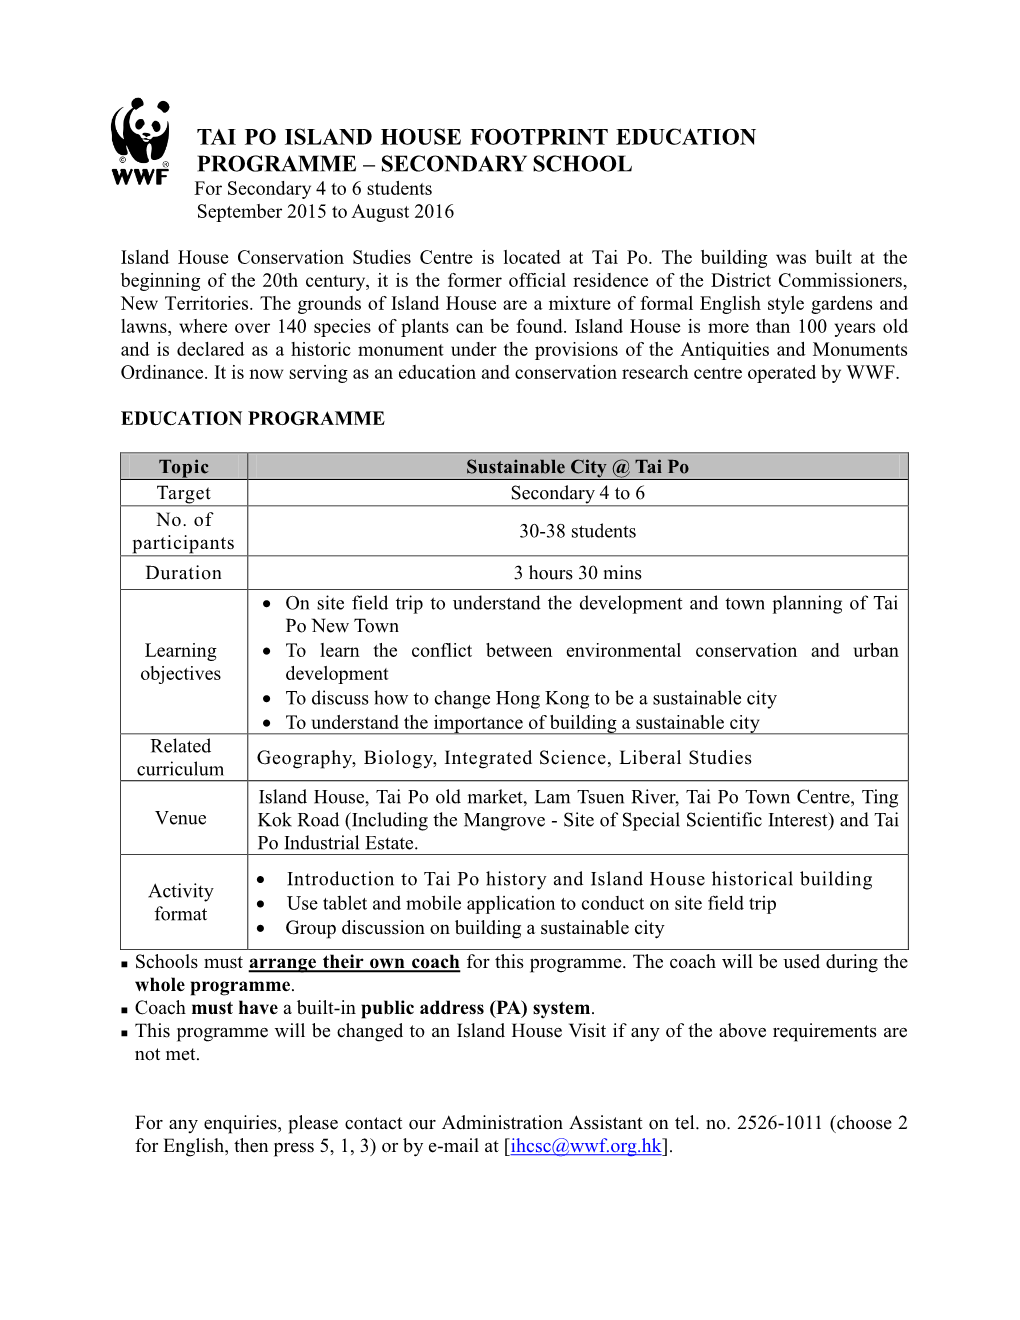 TAI PO ISLAND HOUSE FOOTPRINT EDUCATION PROGRAMME – SECONDARY SCHOOL for Secondary 4 to 6 Students September 2015 to August 2016